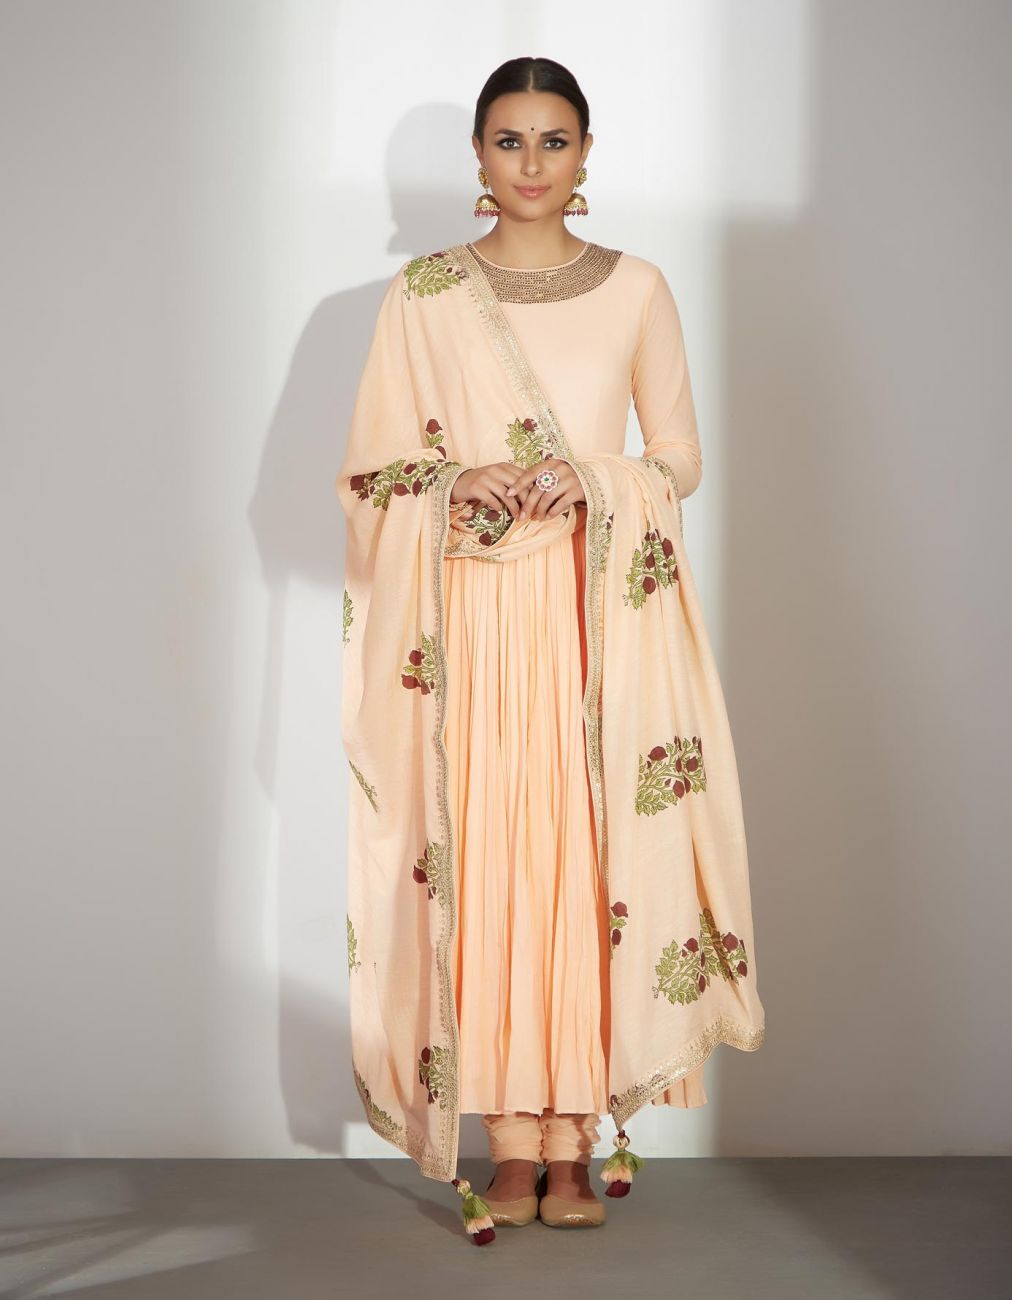 Peach Embroidered Anarkali Set - Indian Clothing in Denver, CO, Aurora, CO, Boulder, CO, Fort Collins, CO, Colorado Springs, CO, Parker, CO, Highlands Ranch, CO, Cherry Creek, CO, Centennial, CO, and Longmont, CO. Nationwide shipping USA - India Fashion X